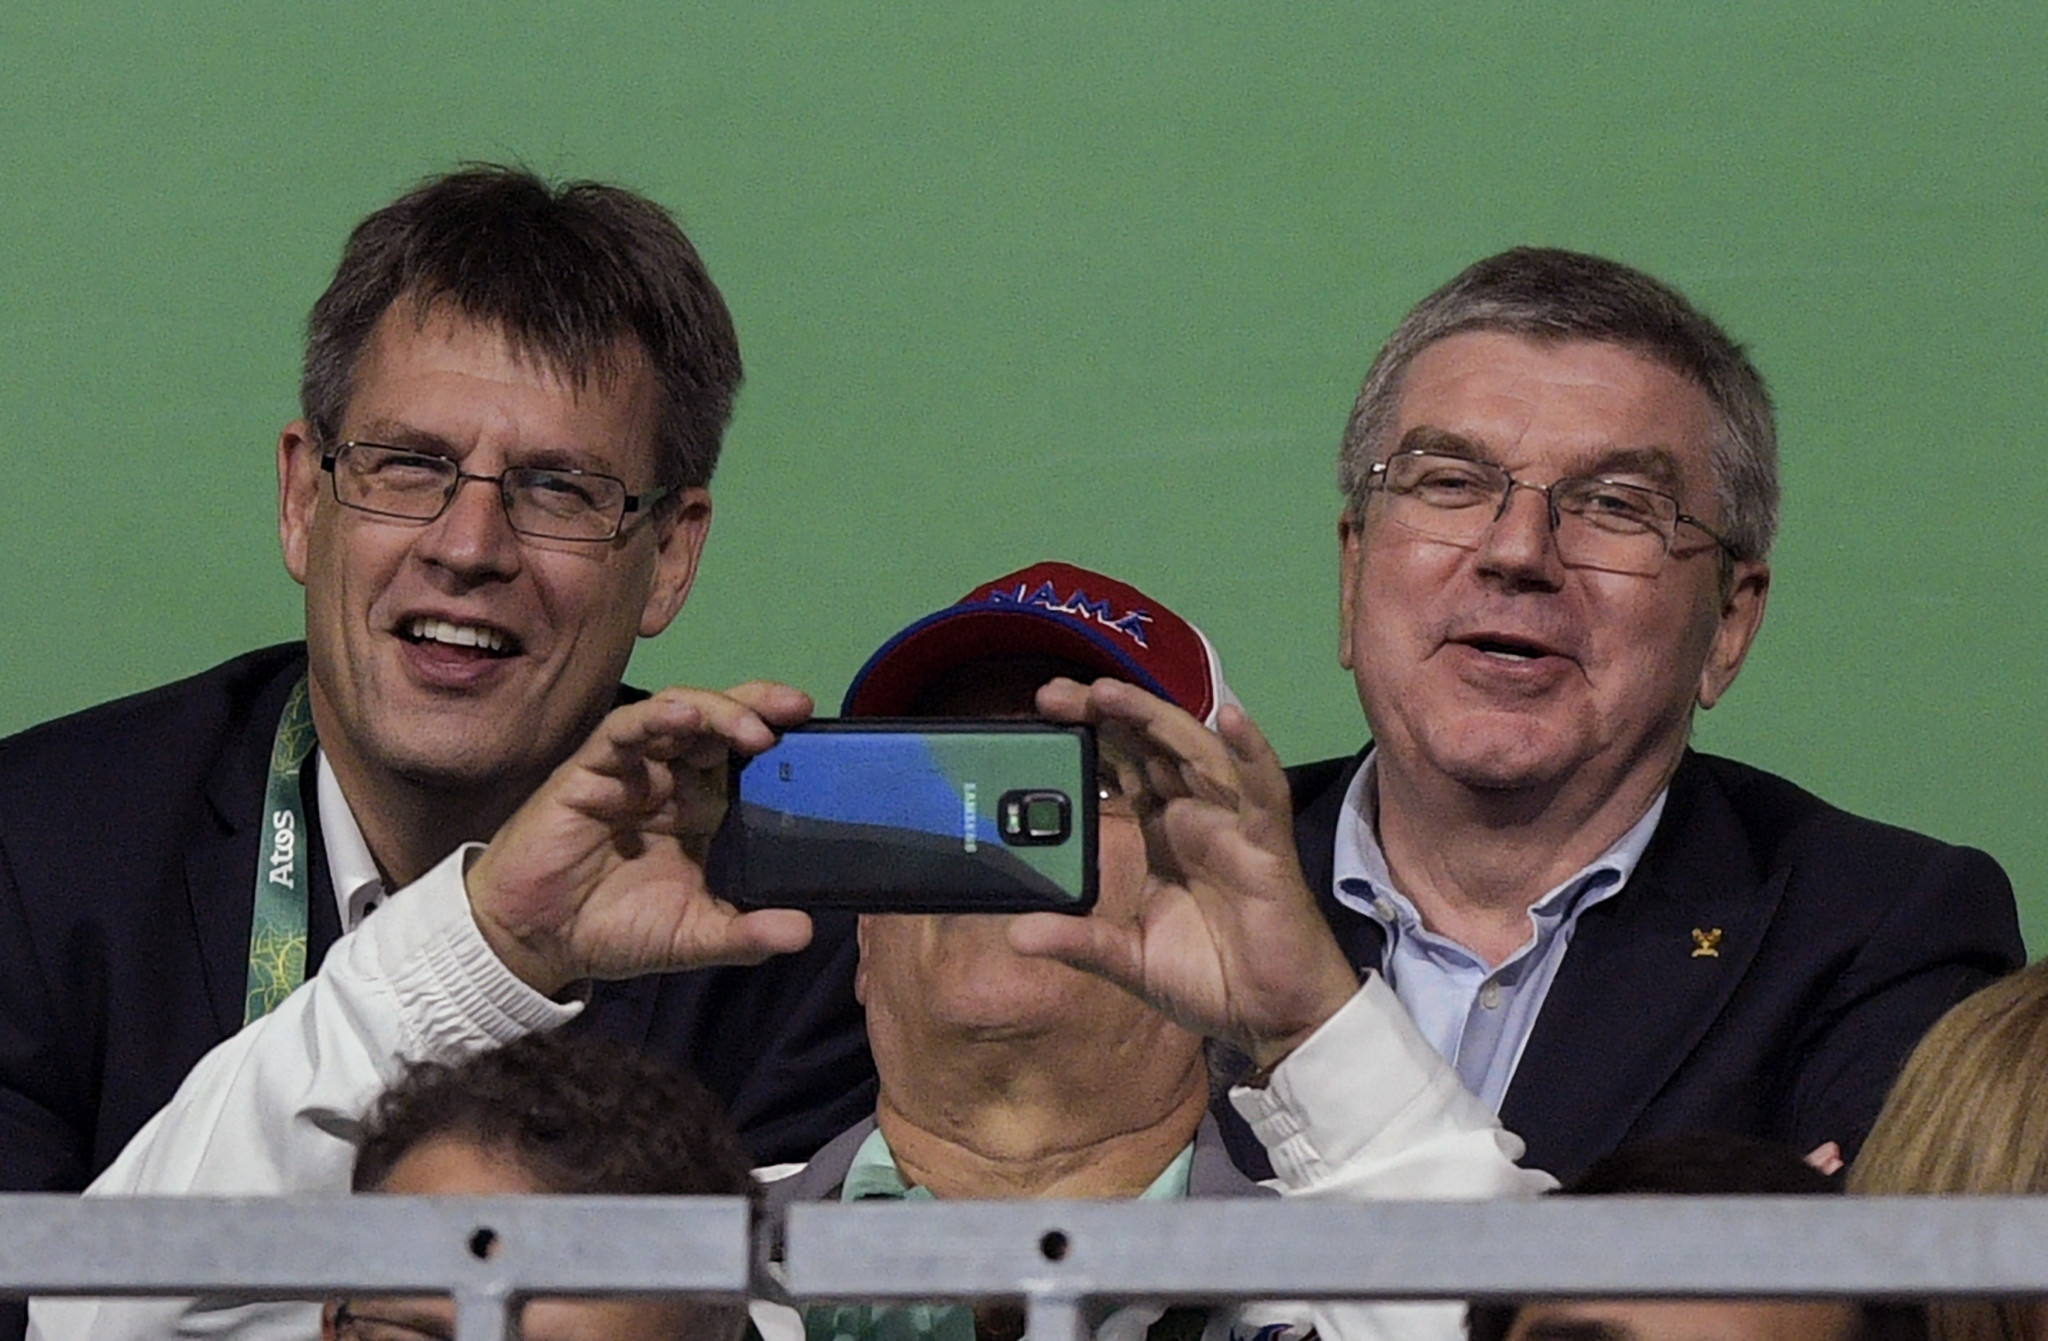 Thomas Weikert has been congratulated by IOC President Thomas Bach following his election victory ©Getty Images